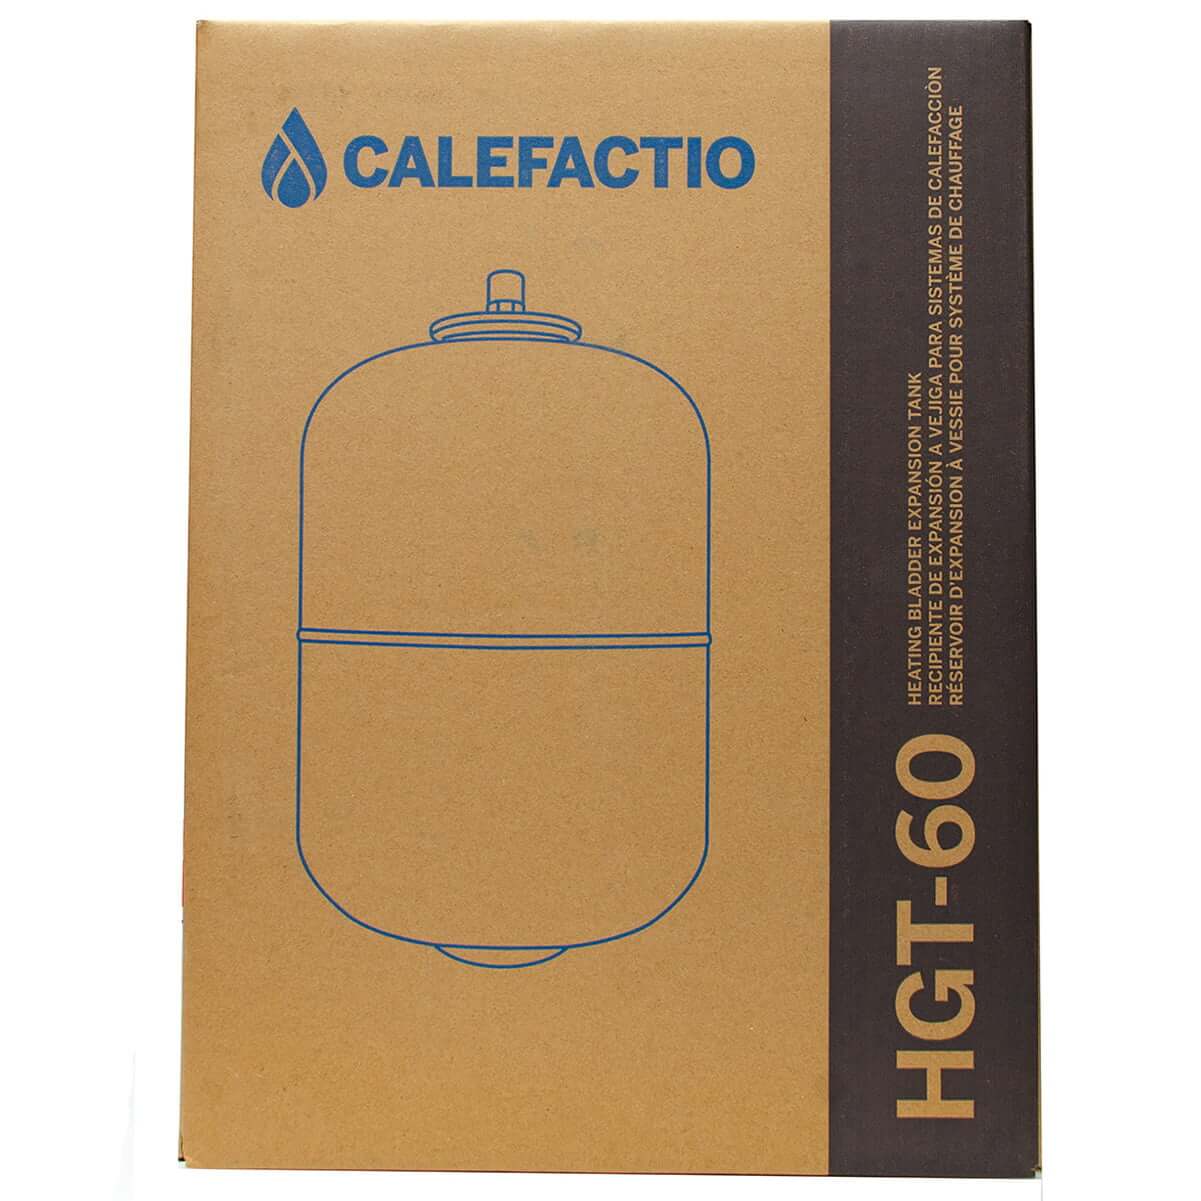 Calefactio HGT-60 Expansion tank for water and glycol in-floor radiant floor system - box